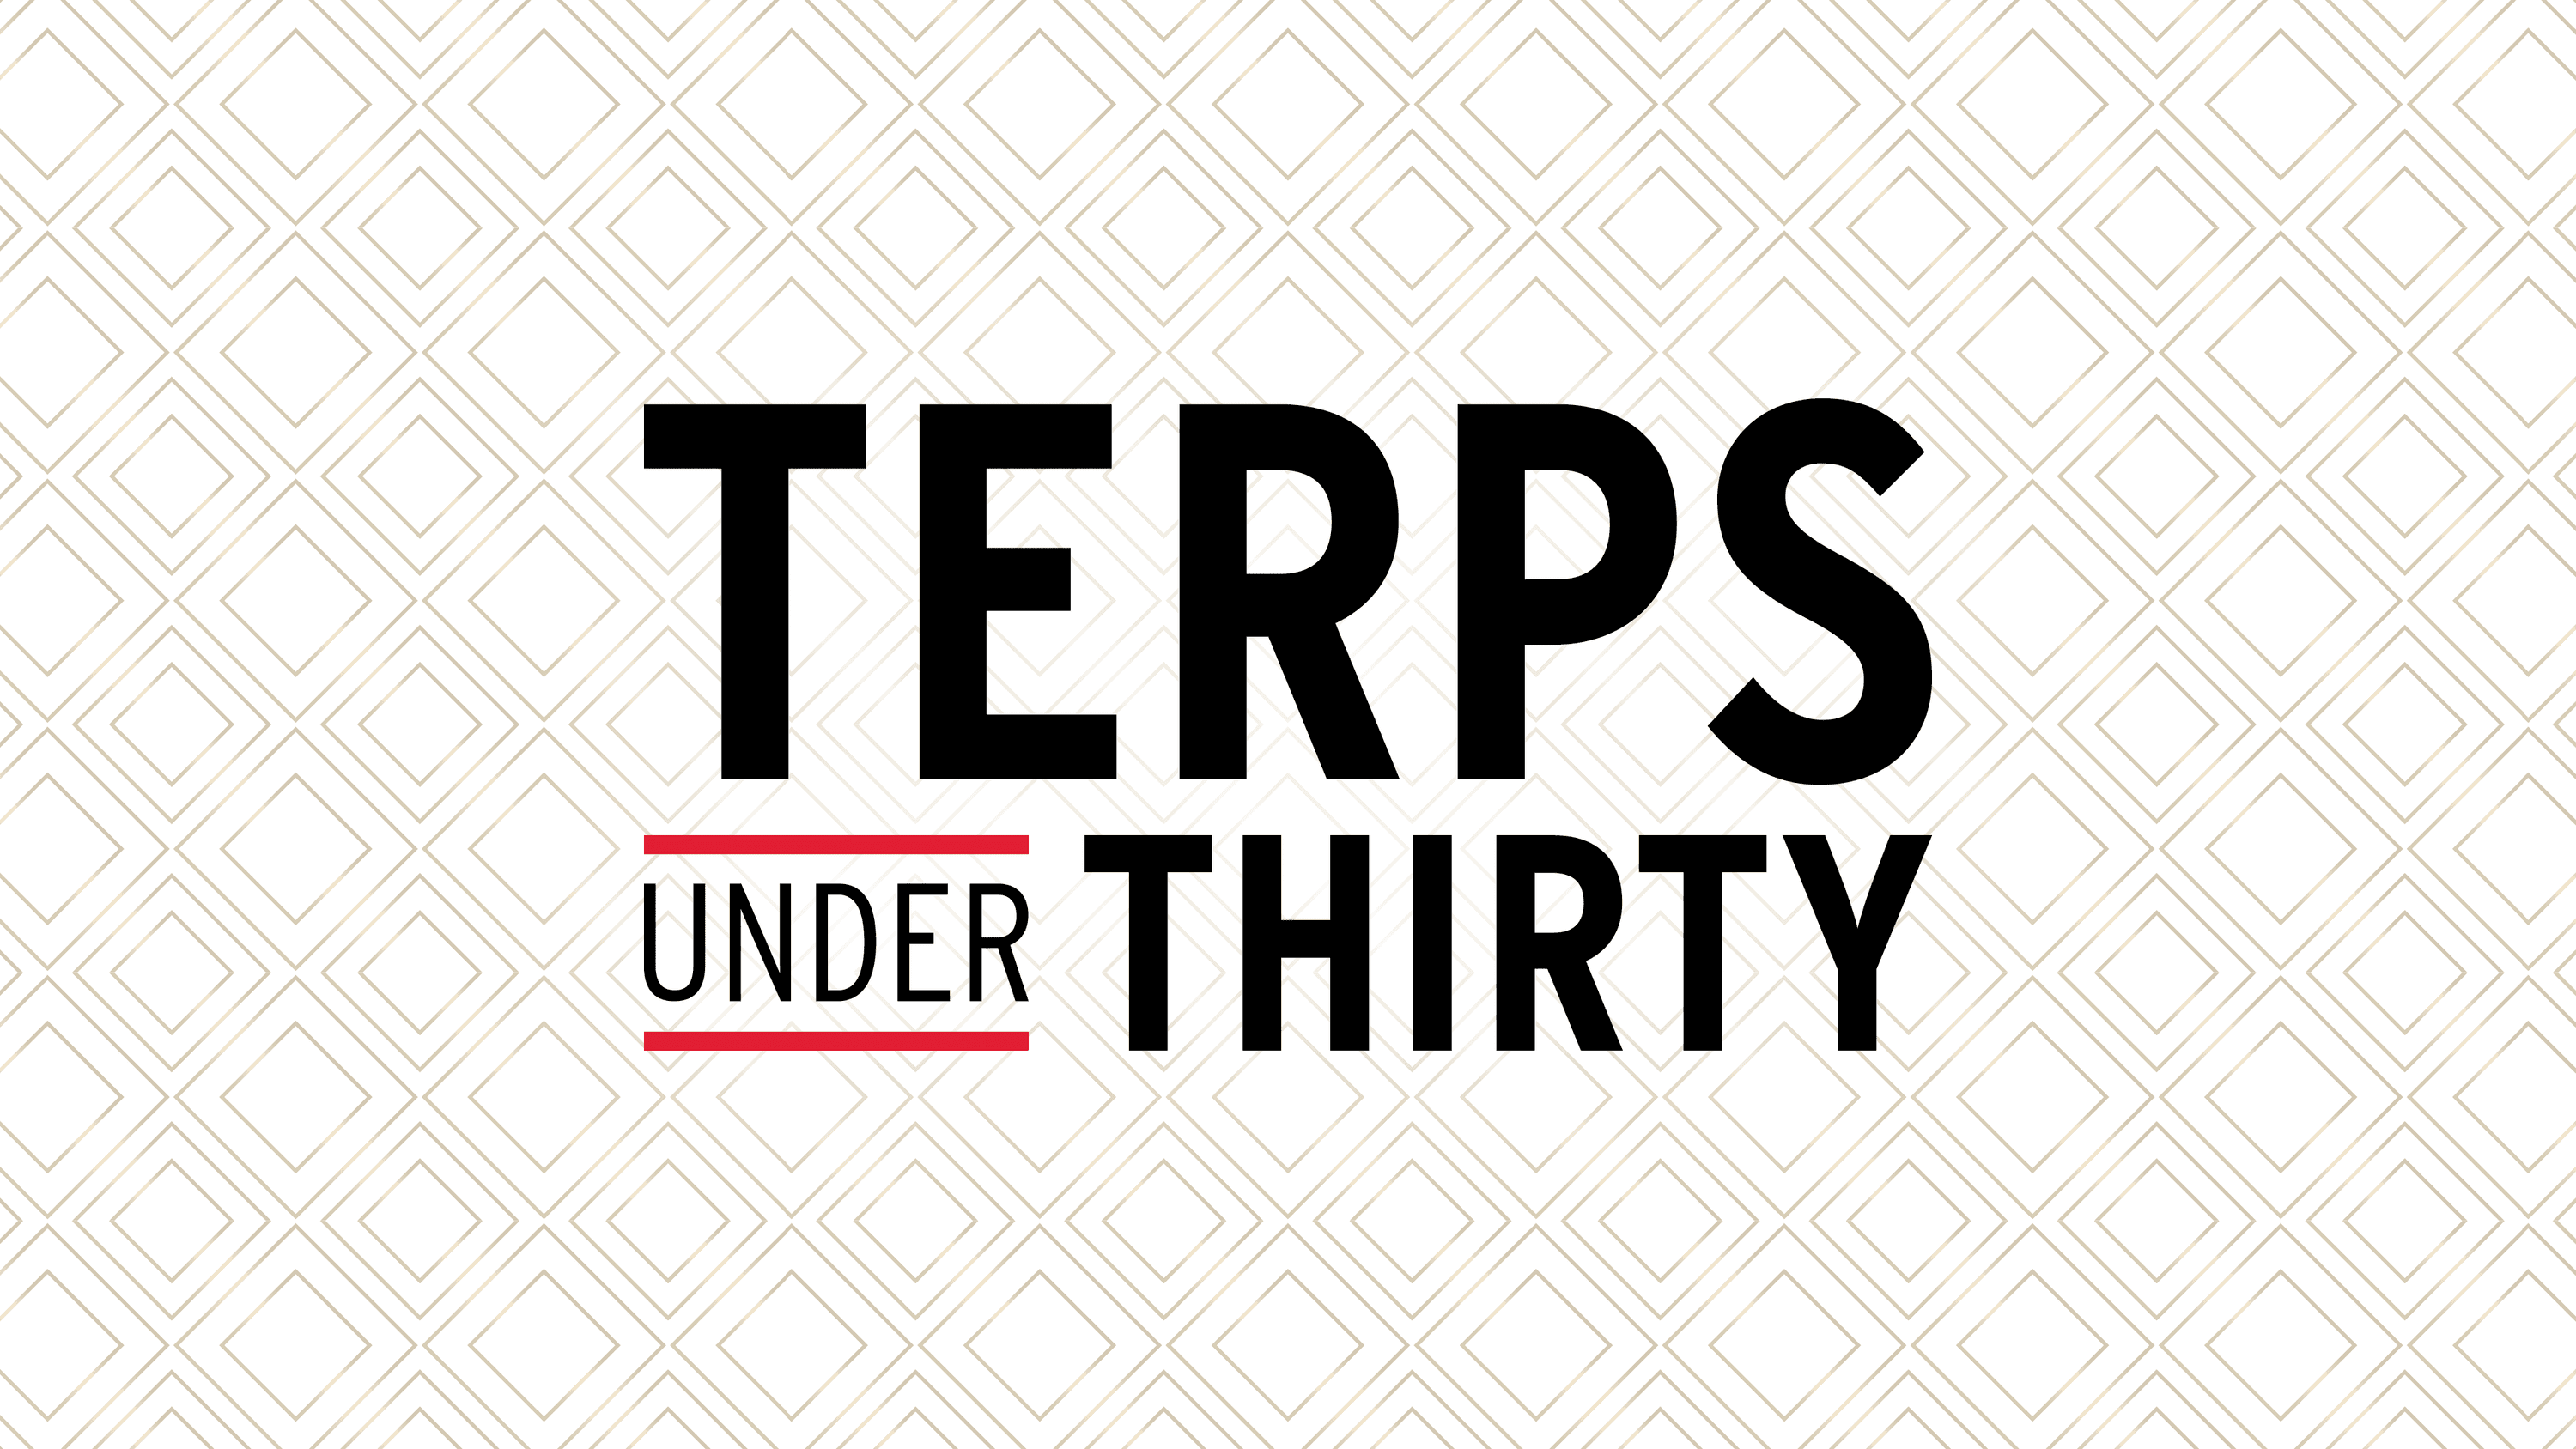 Terps Under Thirty